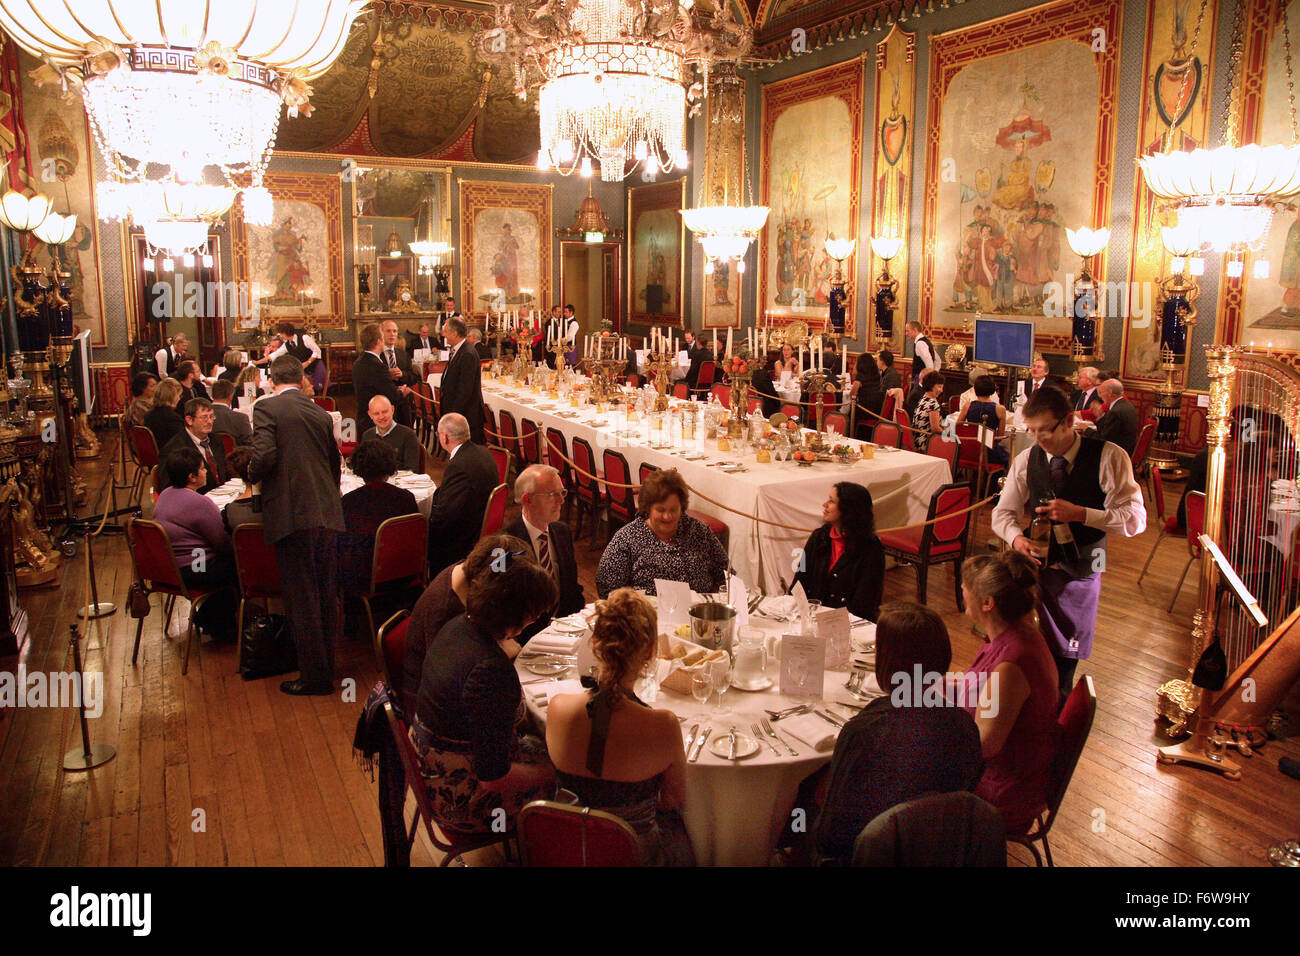 A corporate dinner in progress at the Royal Pavilion Building in Brighton, UK. Stock Photo